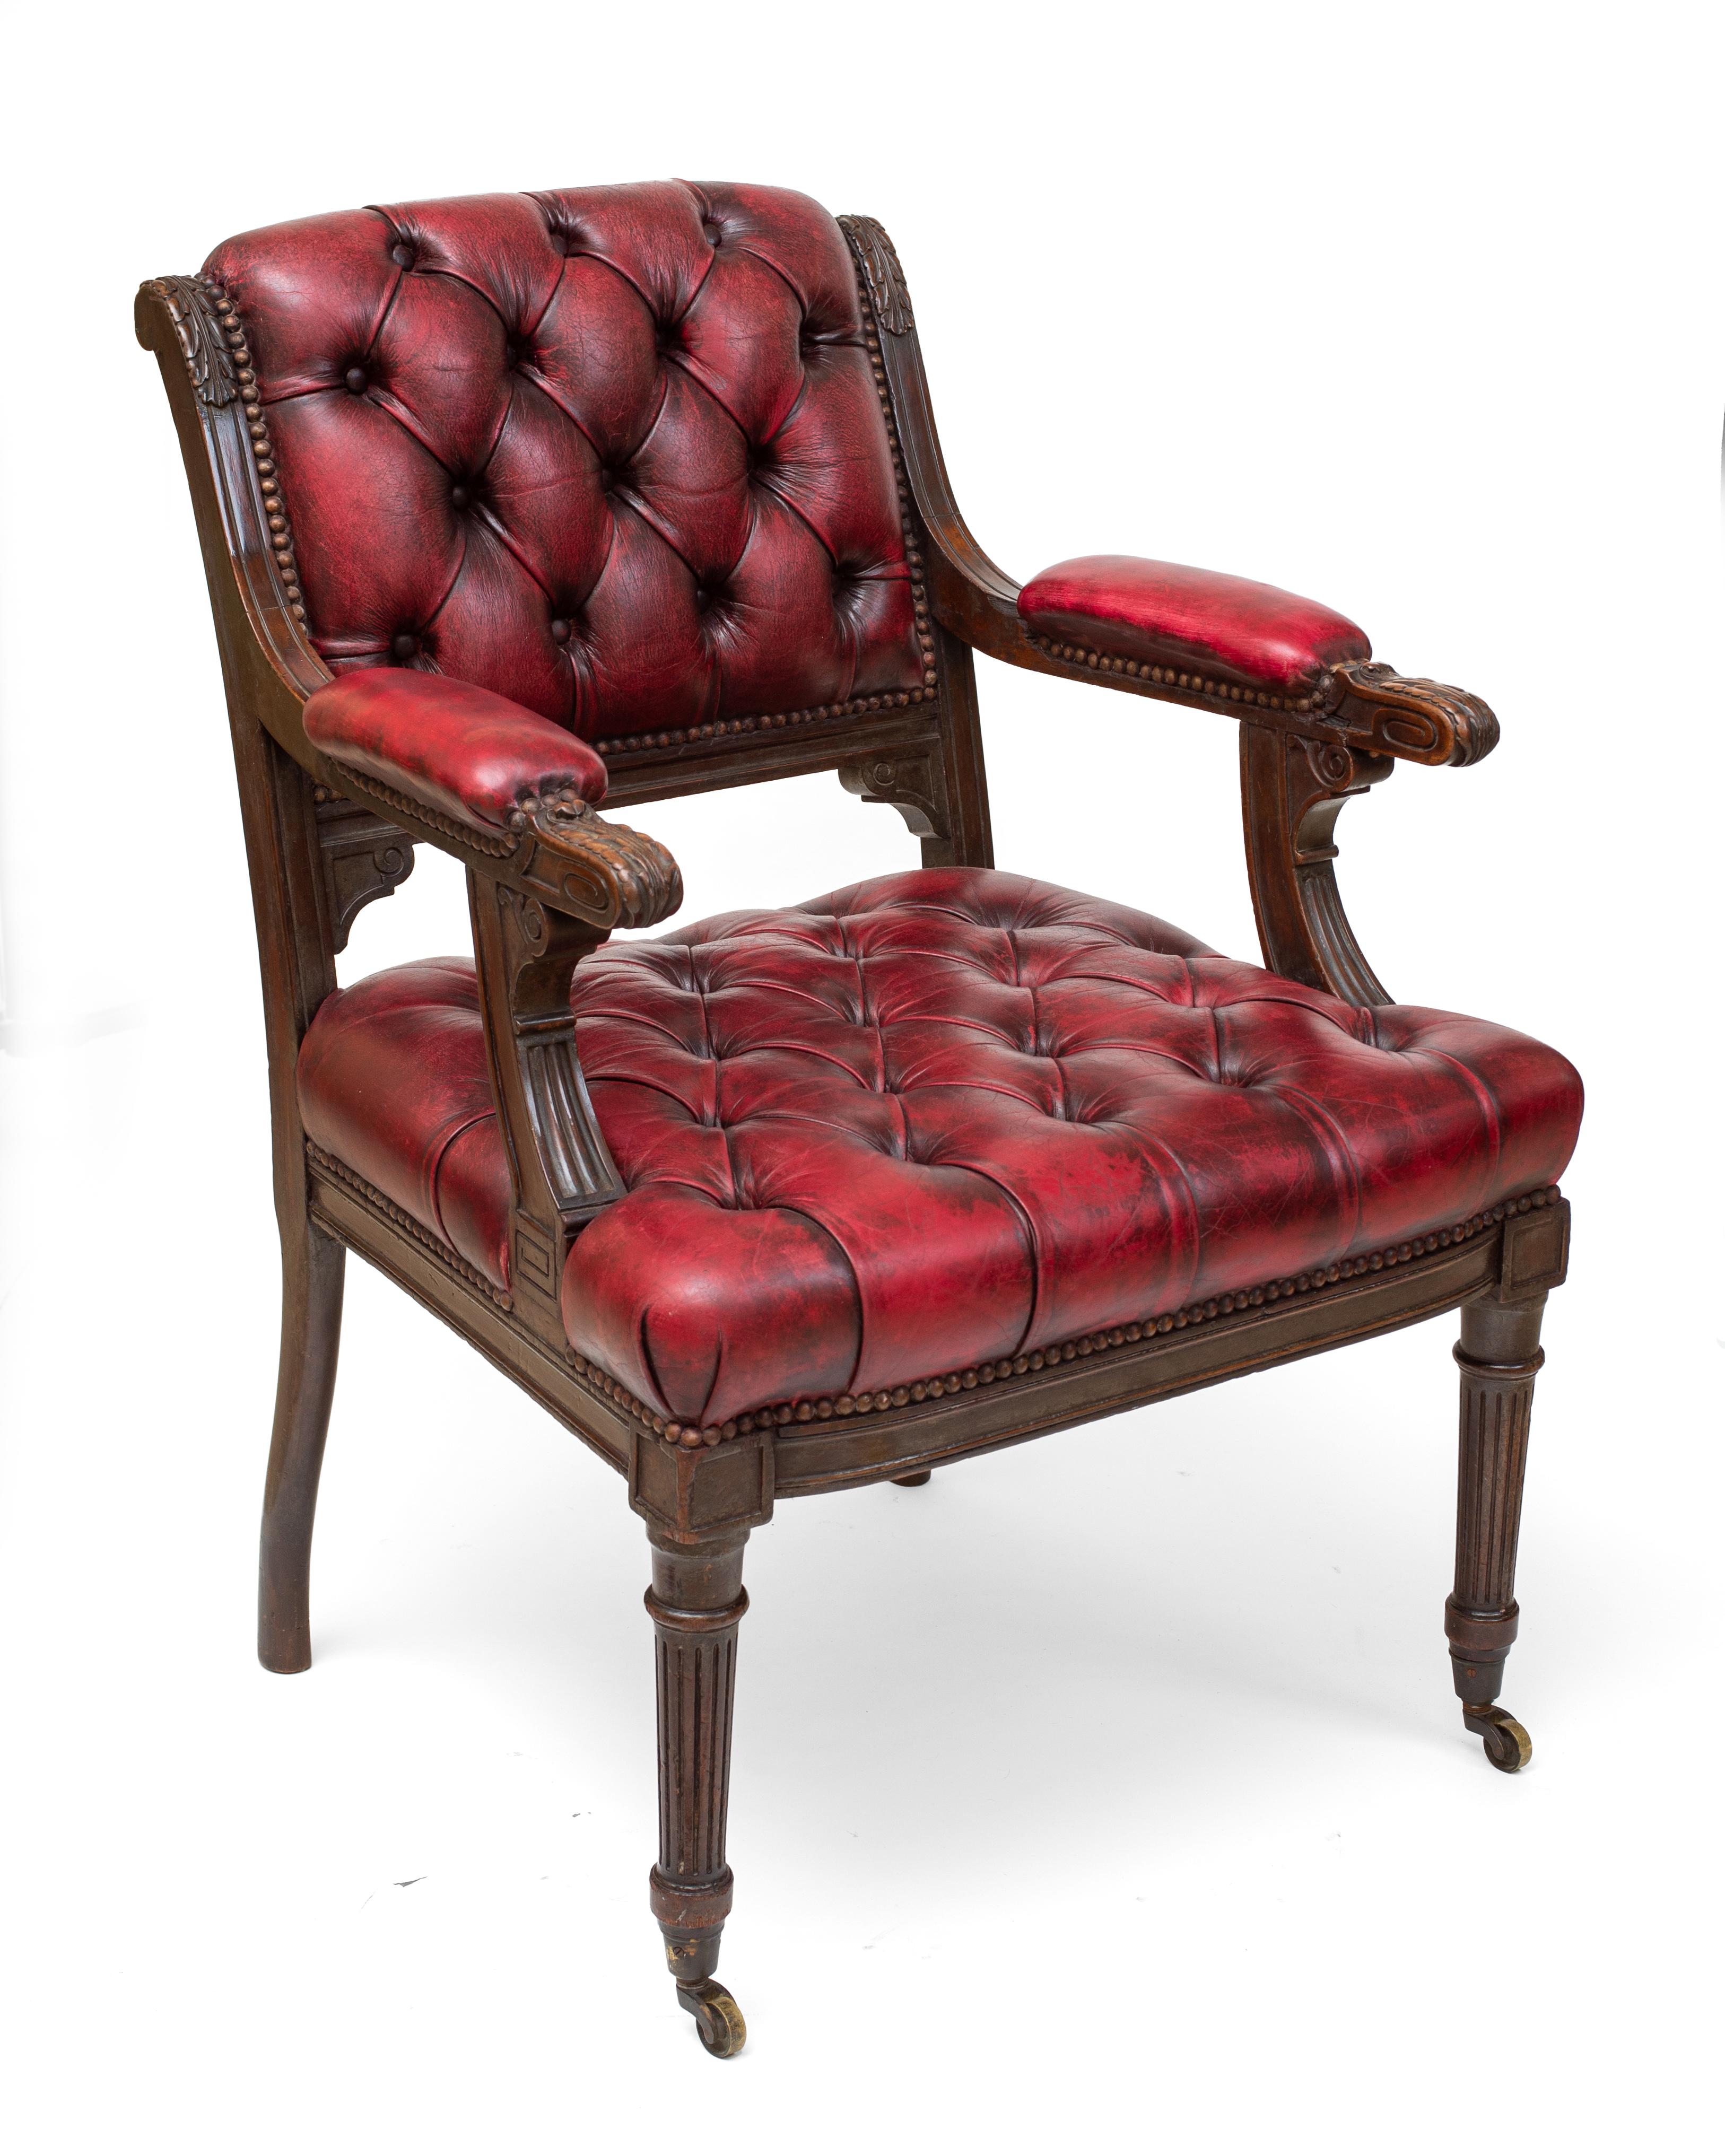 Each with a scrolled back, arms and seat with tufted upholstery, carved with acanthus leaves and Greek keys, raised on front fluted tapering legs ending in casters.
The Regency period was one of great cultural refinement and achievement in Great